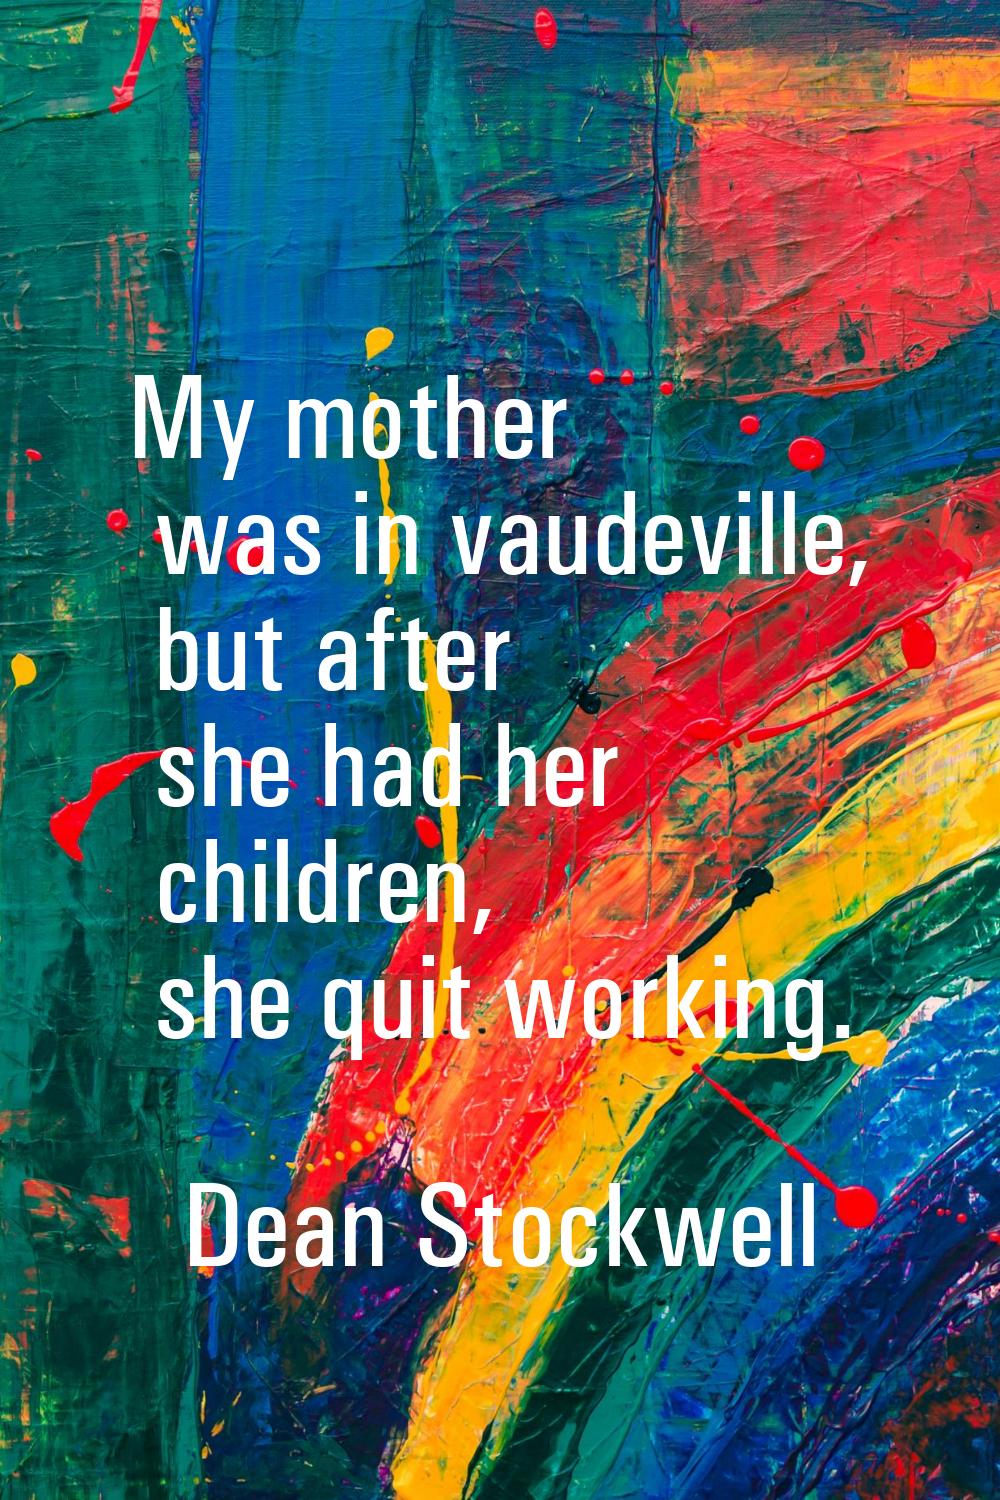 My mother was in vaudeville, but after she had her children, she quit working.